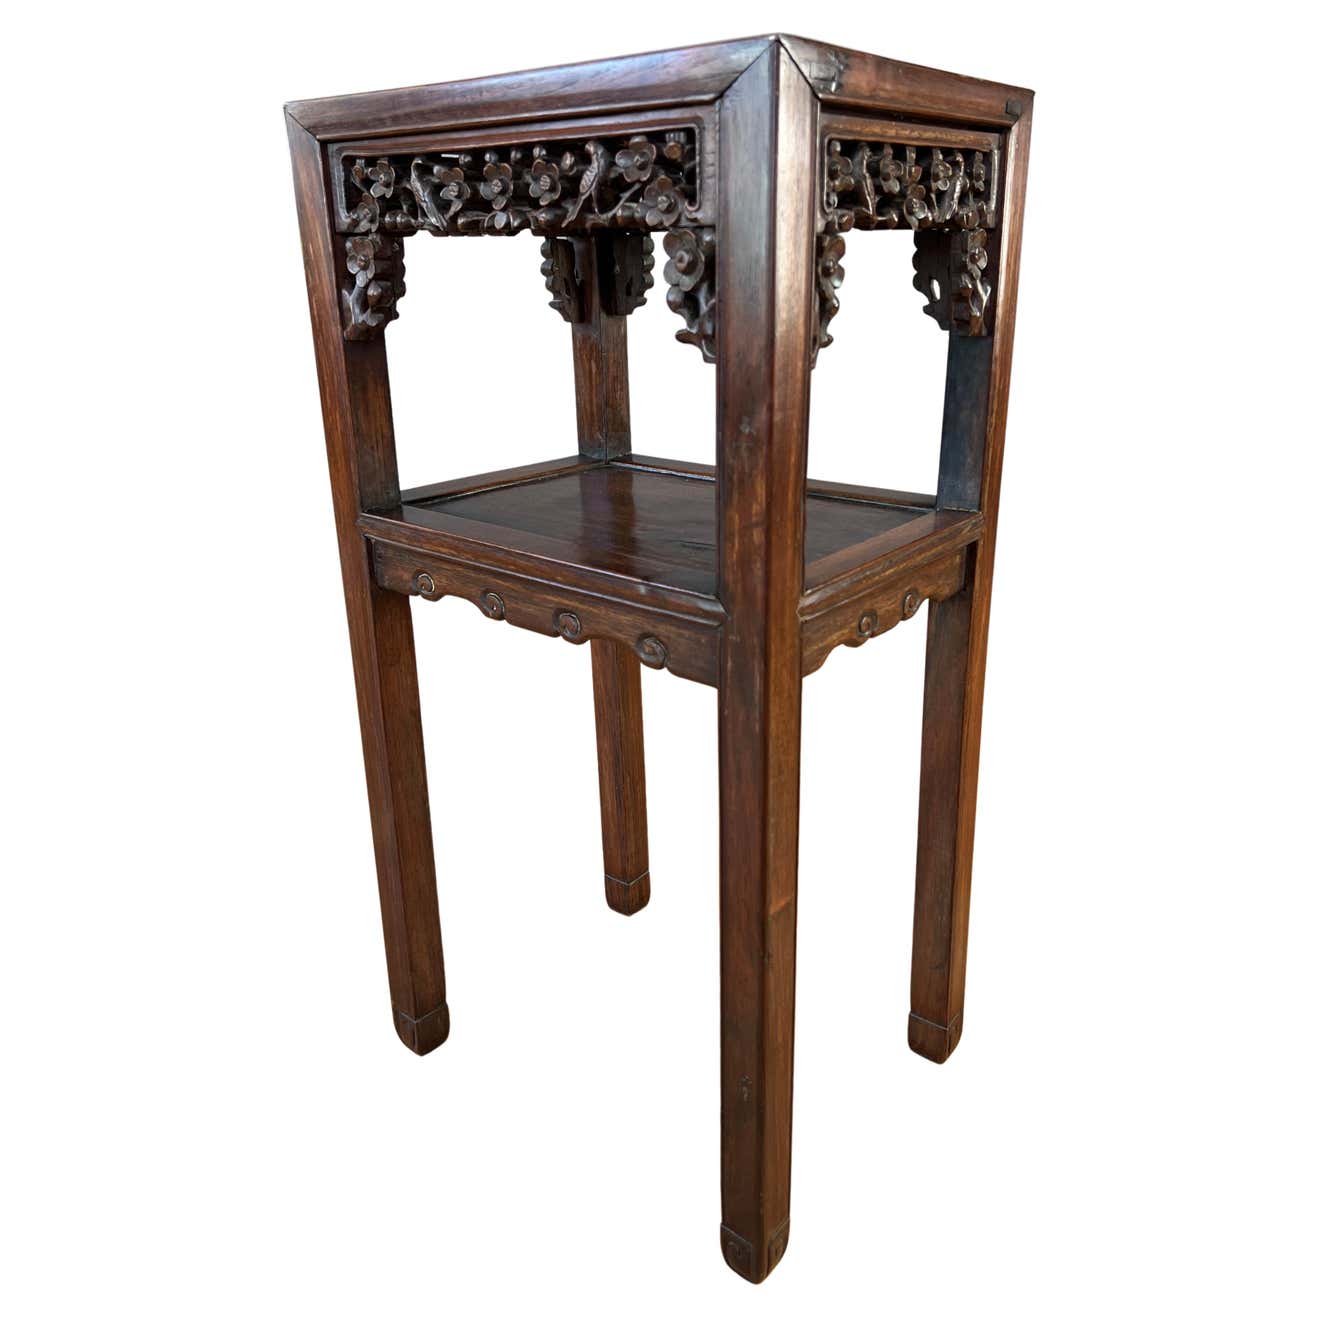 https://pastperfectsf.com/wp-content/uploads/2022/06/19th-Century-Chinese-Zitan-Wood-Tall-End-Table-1.jpg